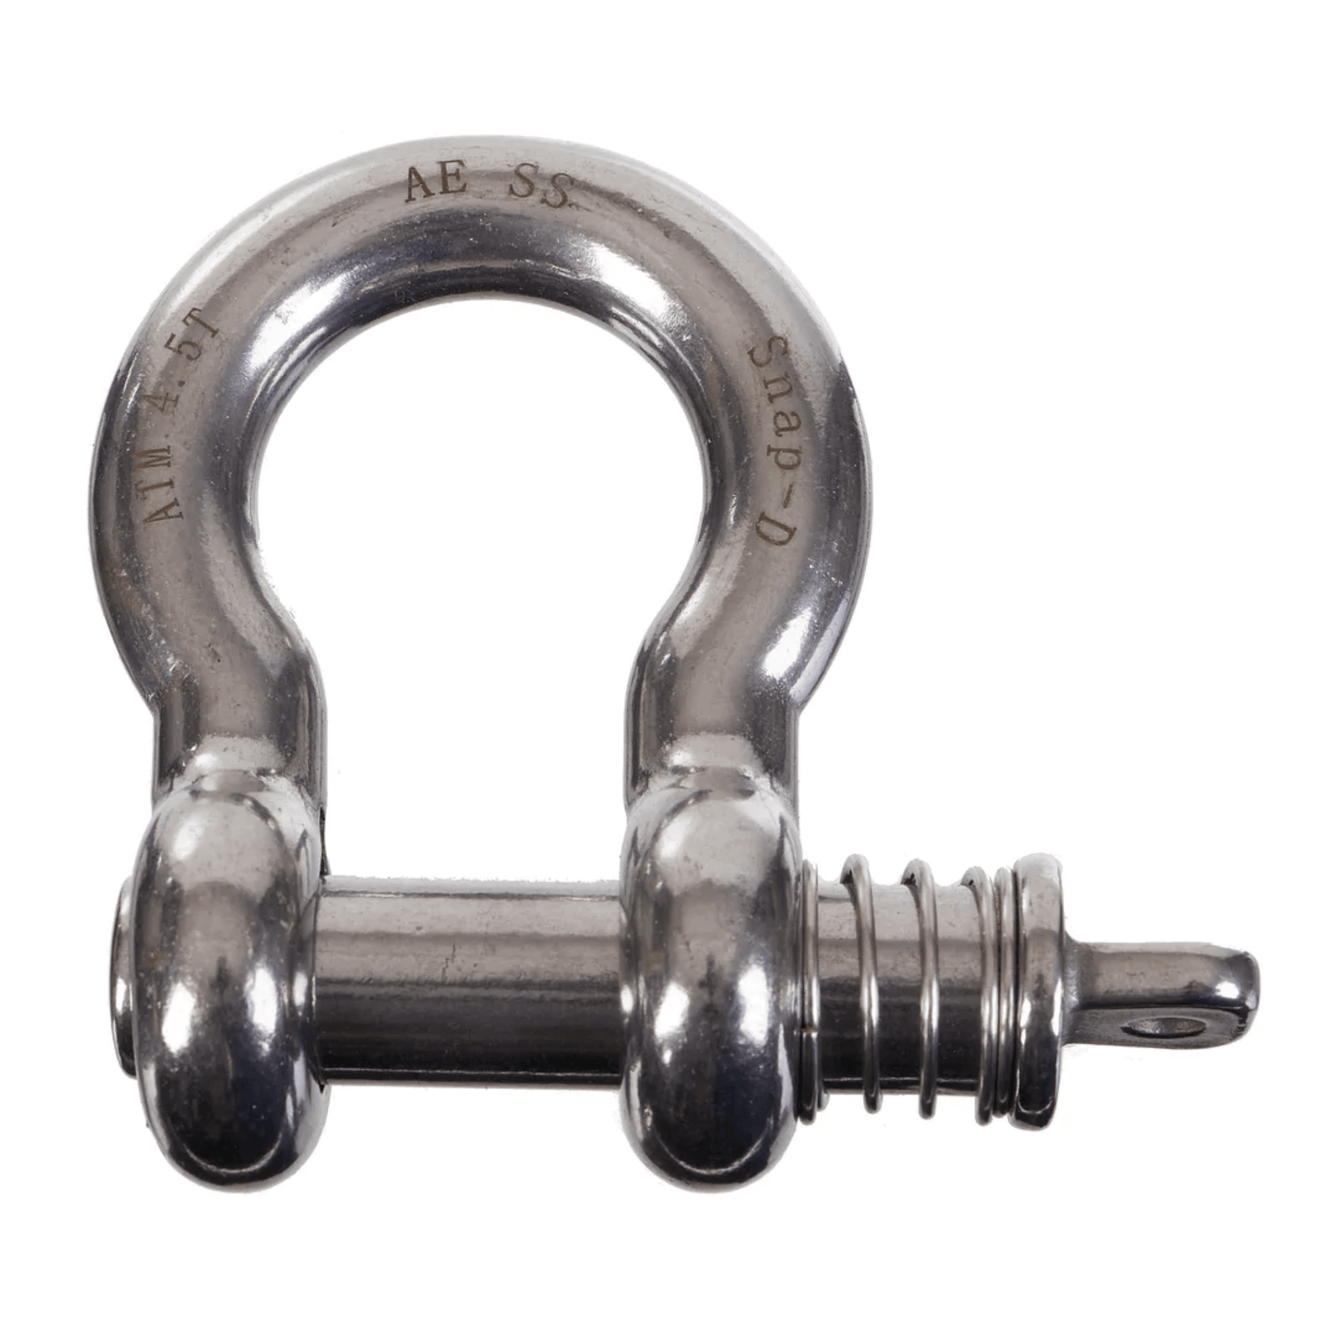 Bow Shackle (19MM - 4500KG)